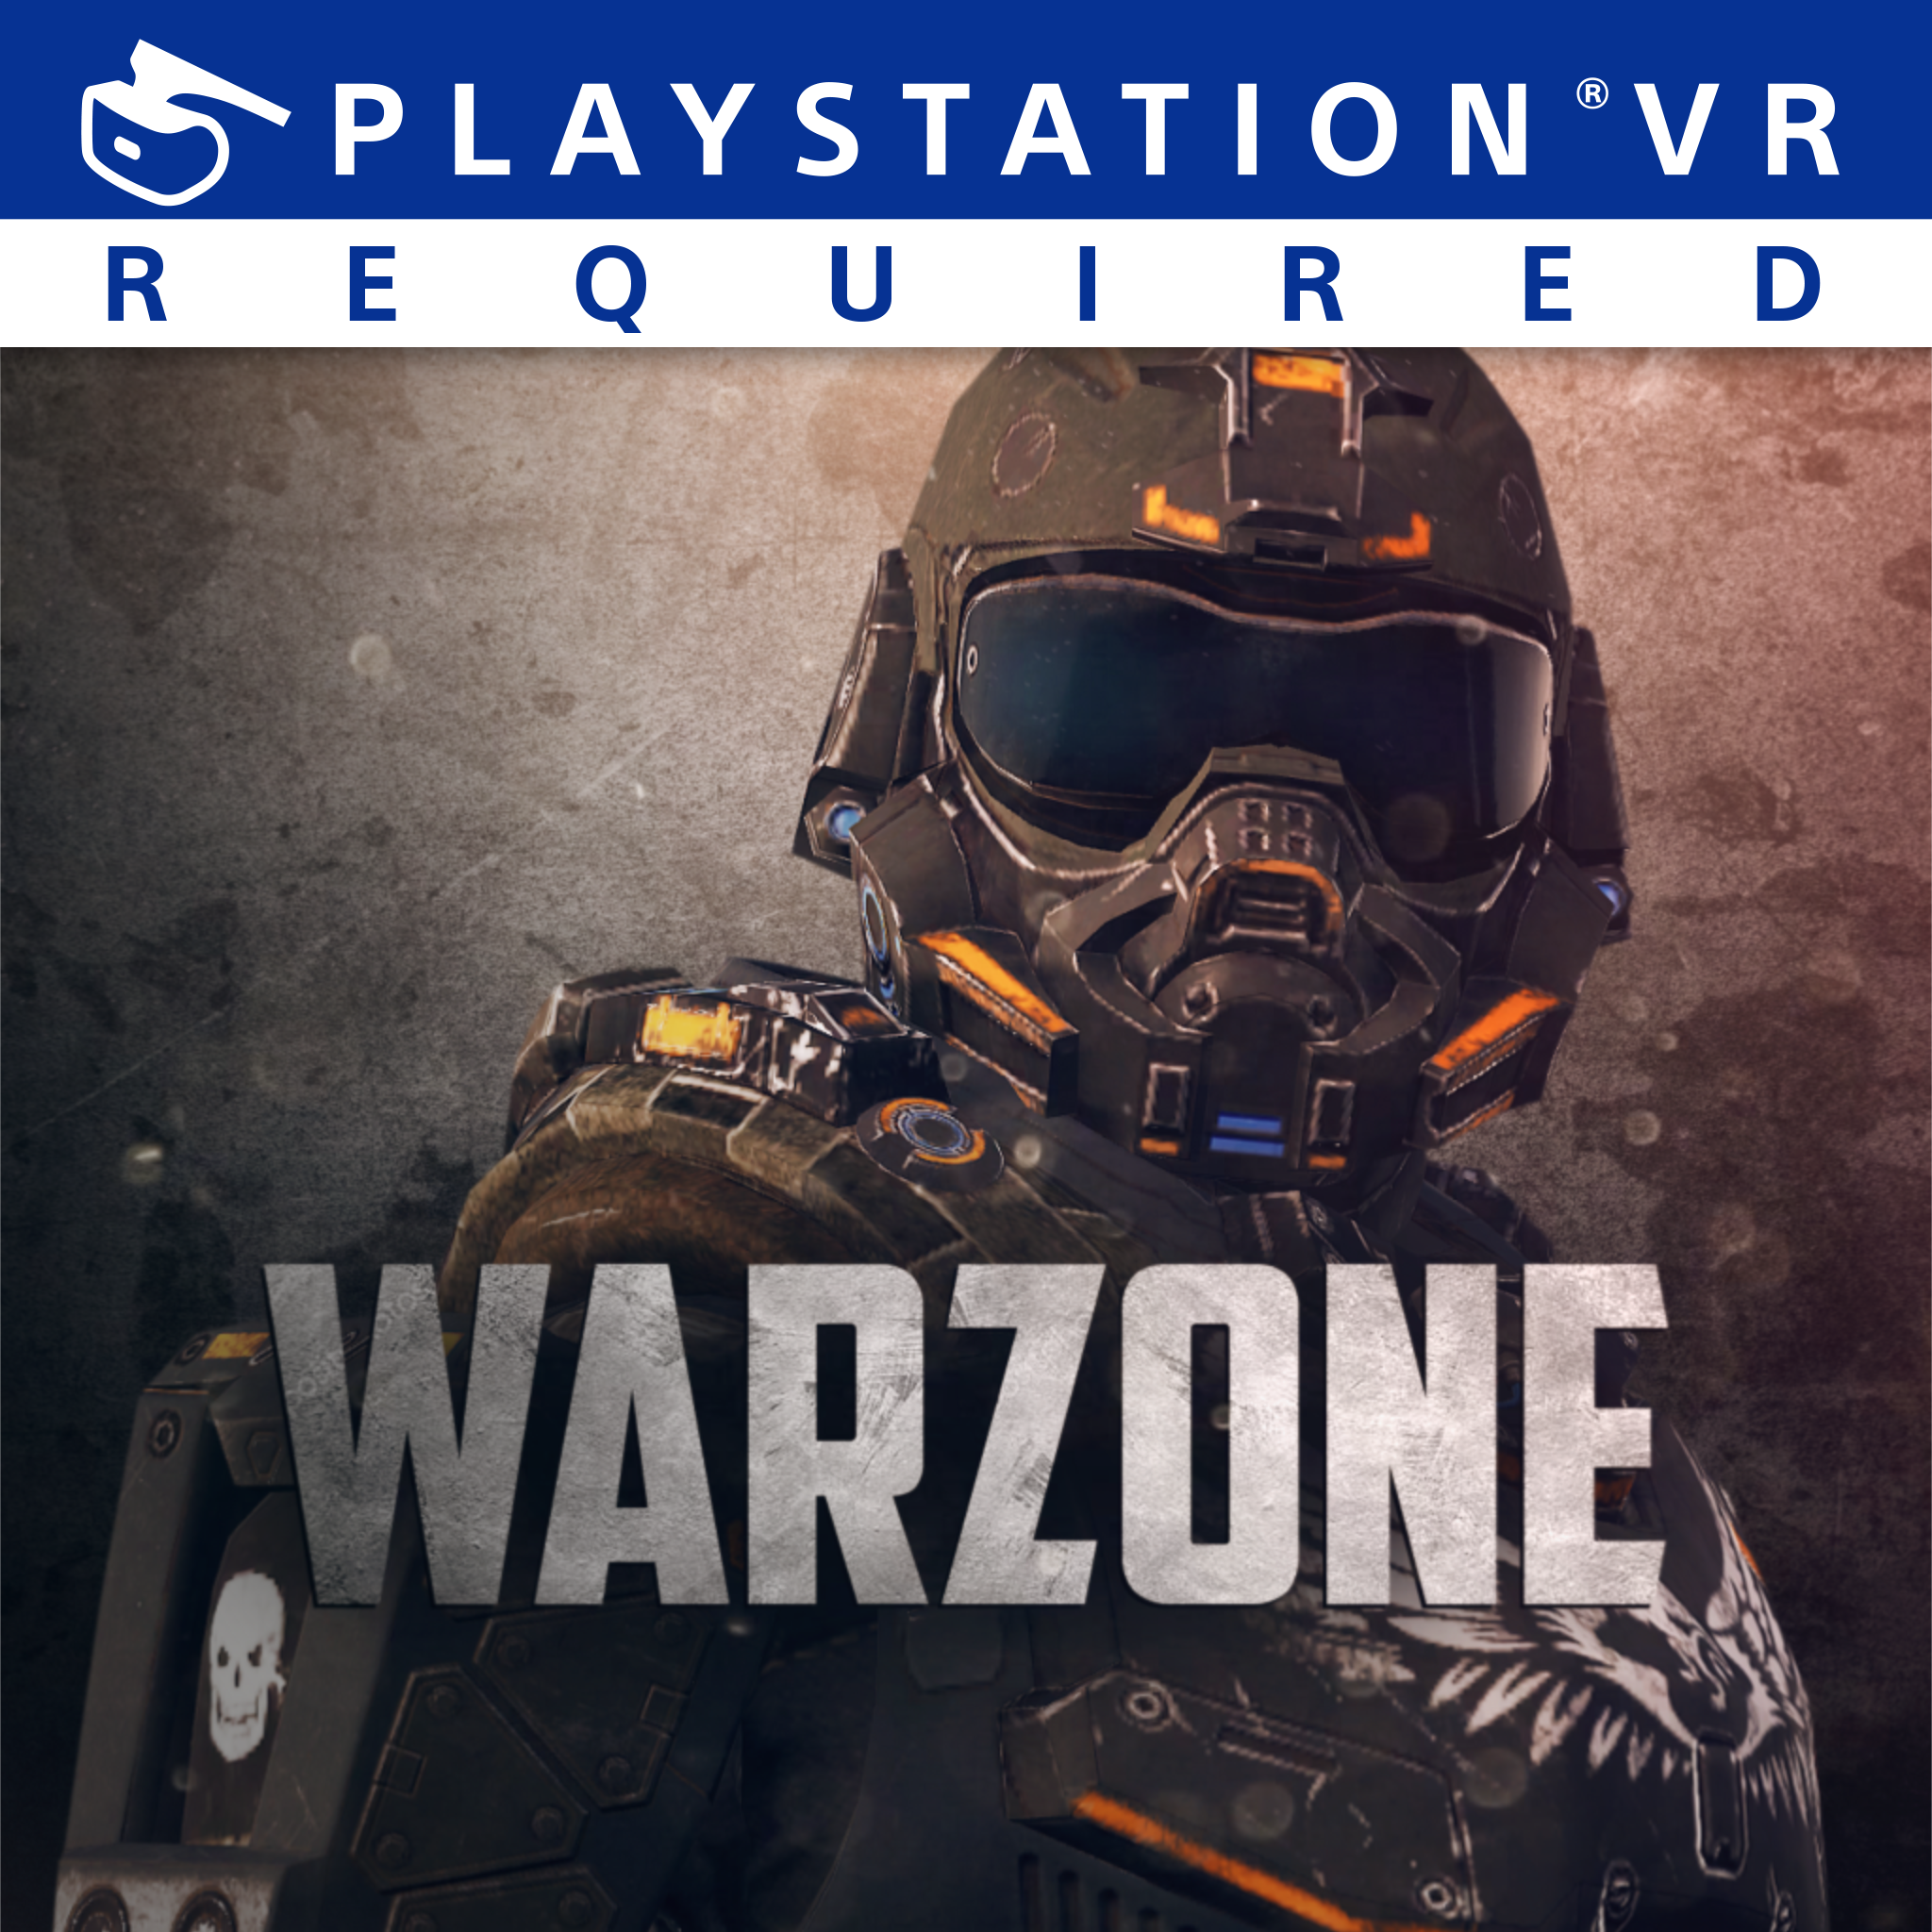 warzone ps4 vr